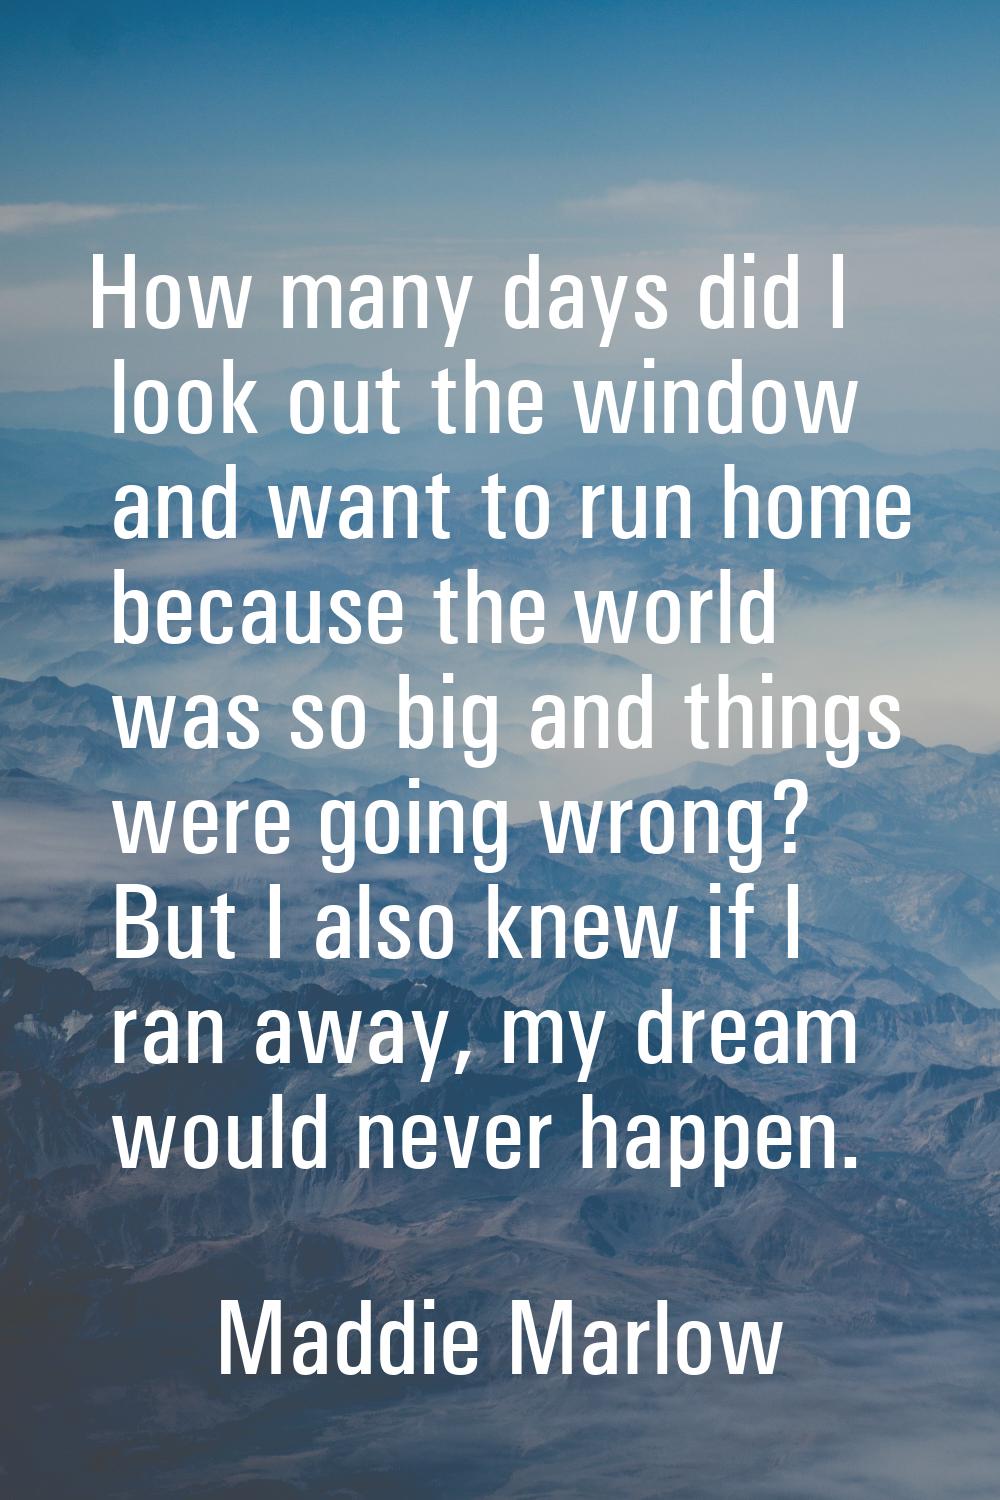 How many days did I look out the window and want to run home because the world was so big and thing